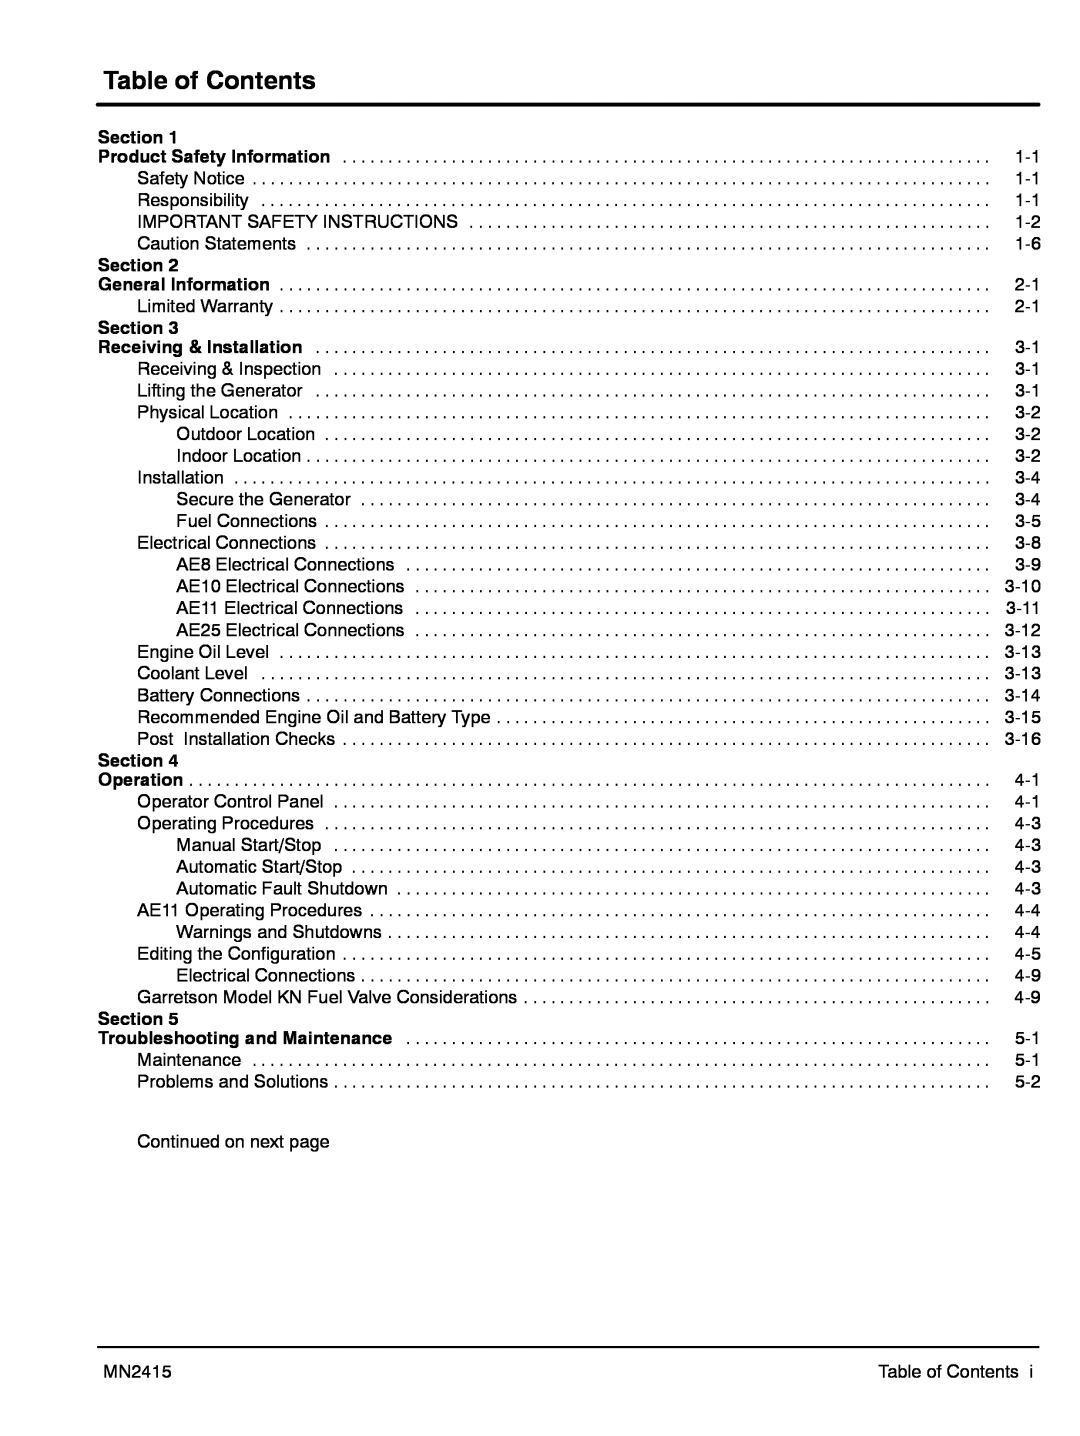 Baldor AE8, AE11, AE10, AE25 manual Table of Contents, Section 